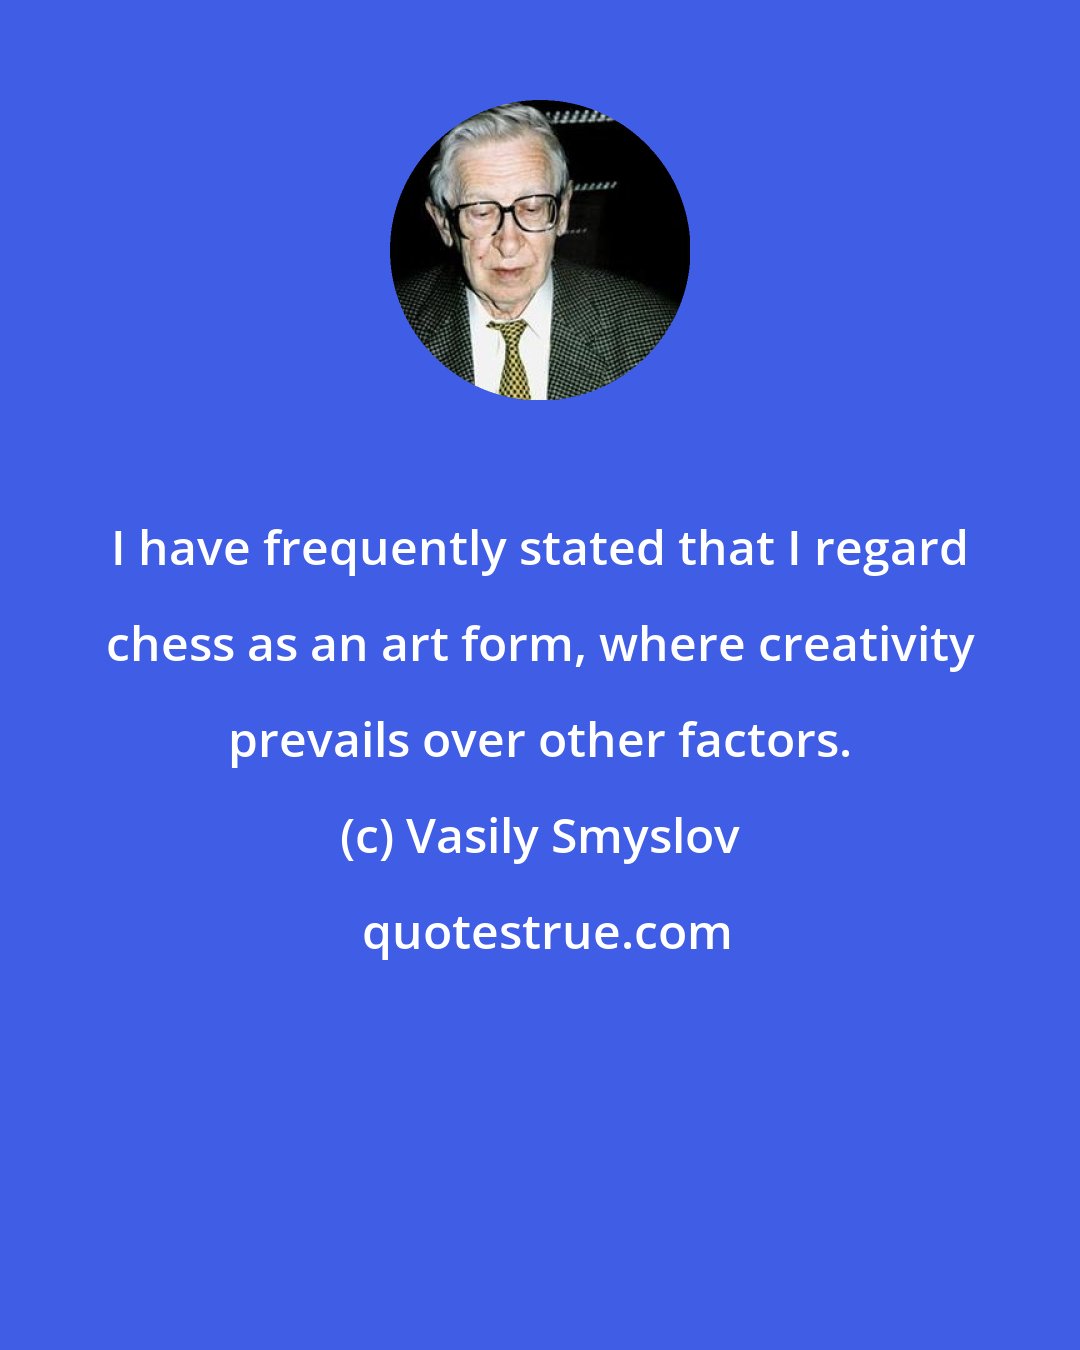 Vasily Smyslov: I have frequently stated that I regard chess as an art form, where creativity prevails over other factors.